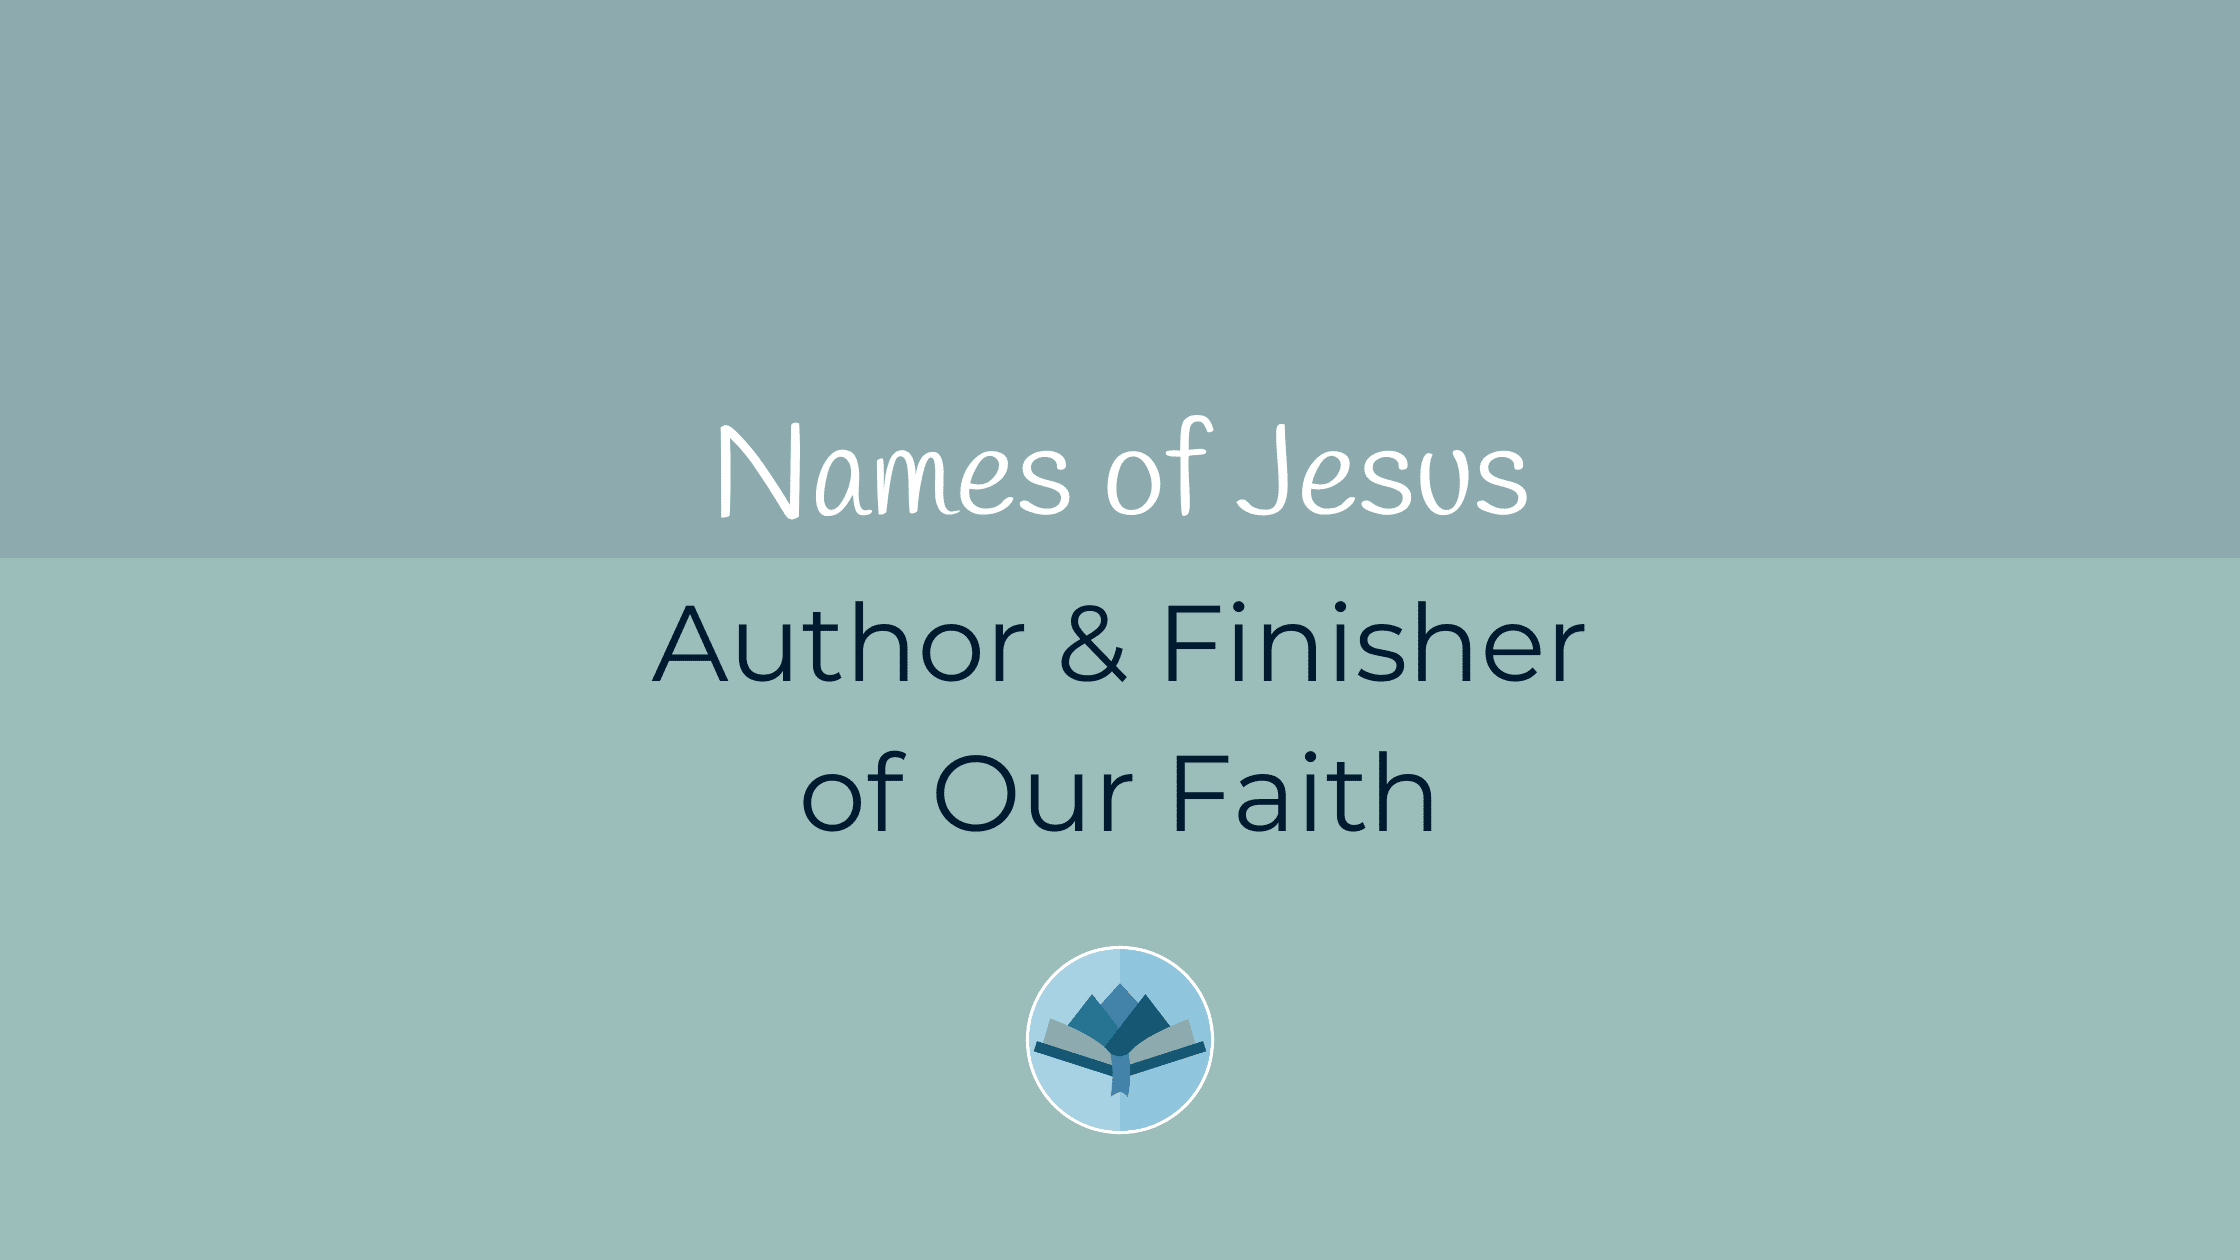 Names of Jesus Author and Finisher of Our Faith